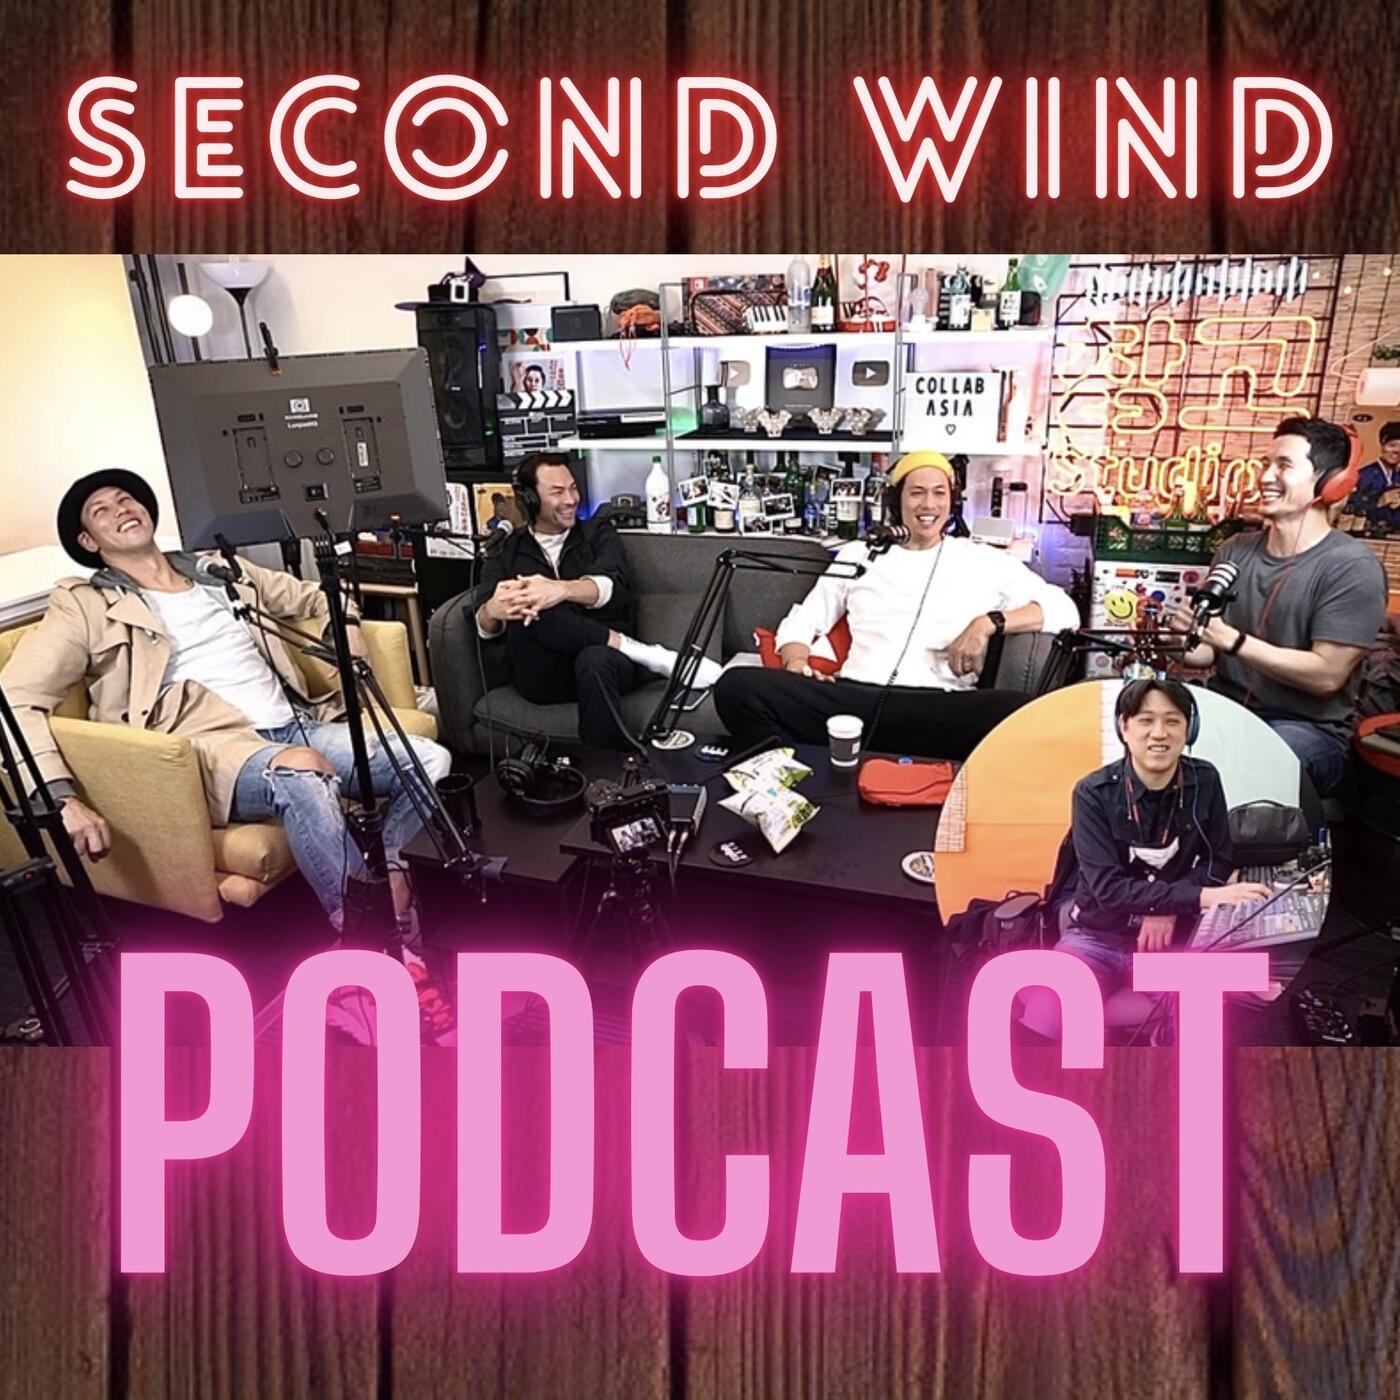 Second Wind Podcast iHeartRadio